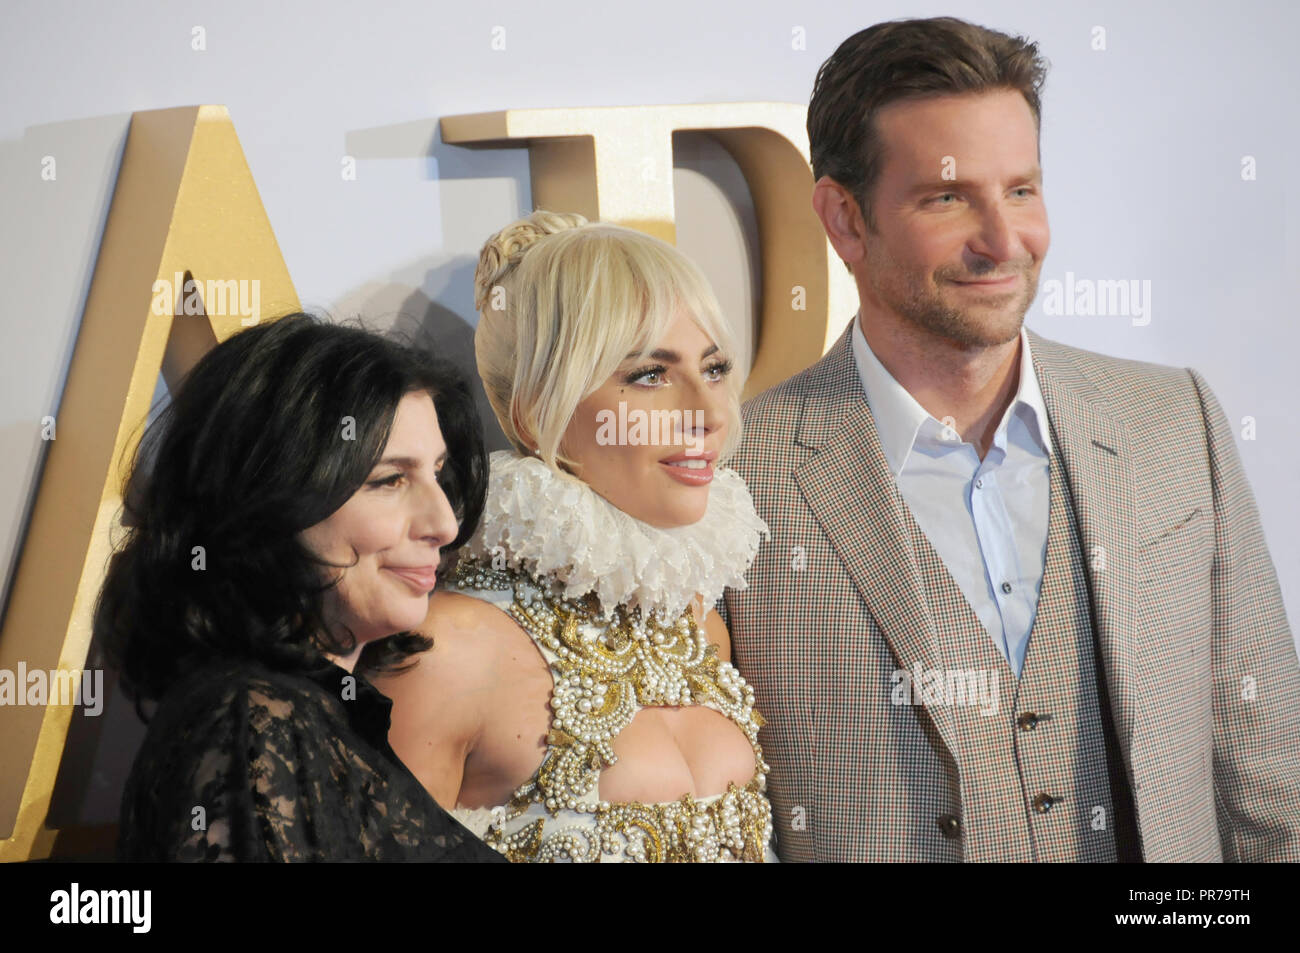 The London film premier of A Star is Born. Sue Kroll, Lady Gaga and Bradley Cooper pose for the cameras. Stock Photo